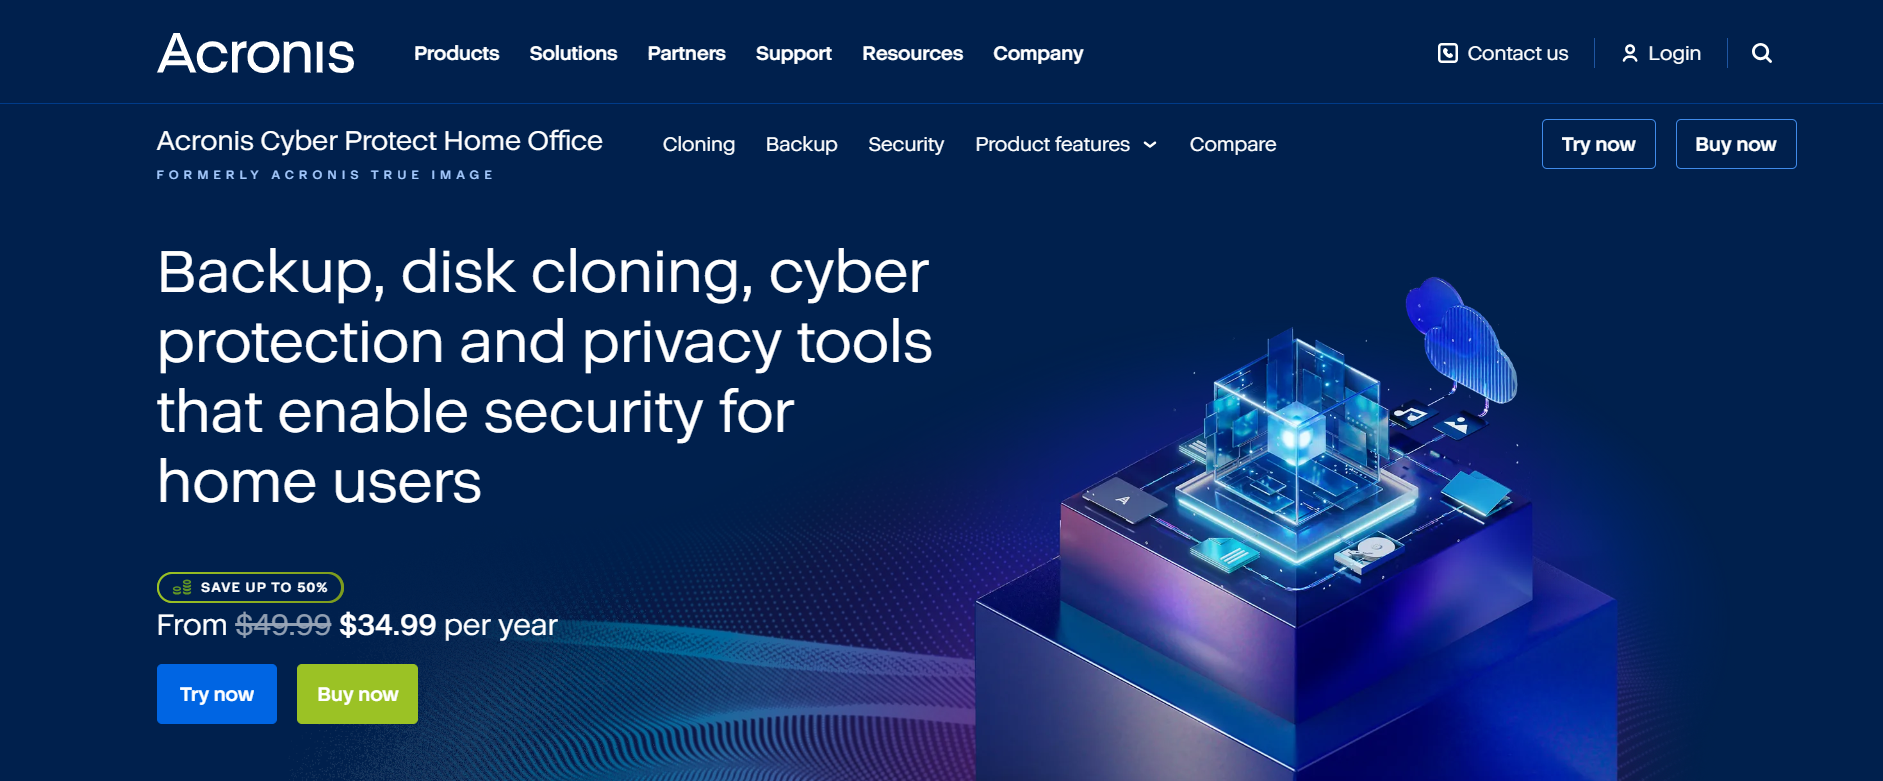 Upgrade Your Cyber Protection With Acronis Cyber Protect Home Office Techradar